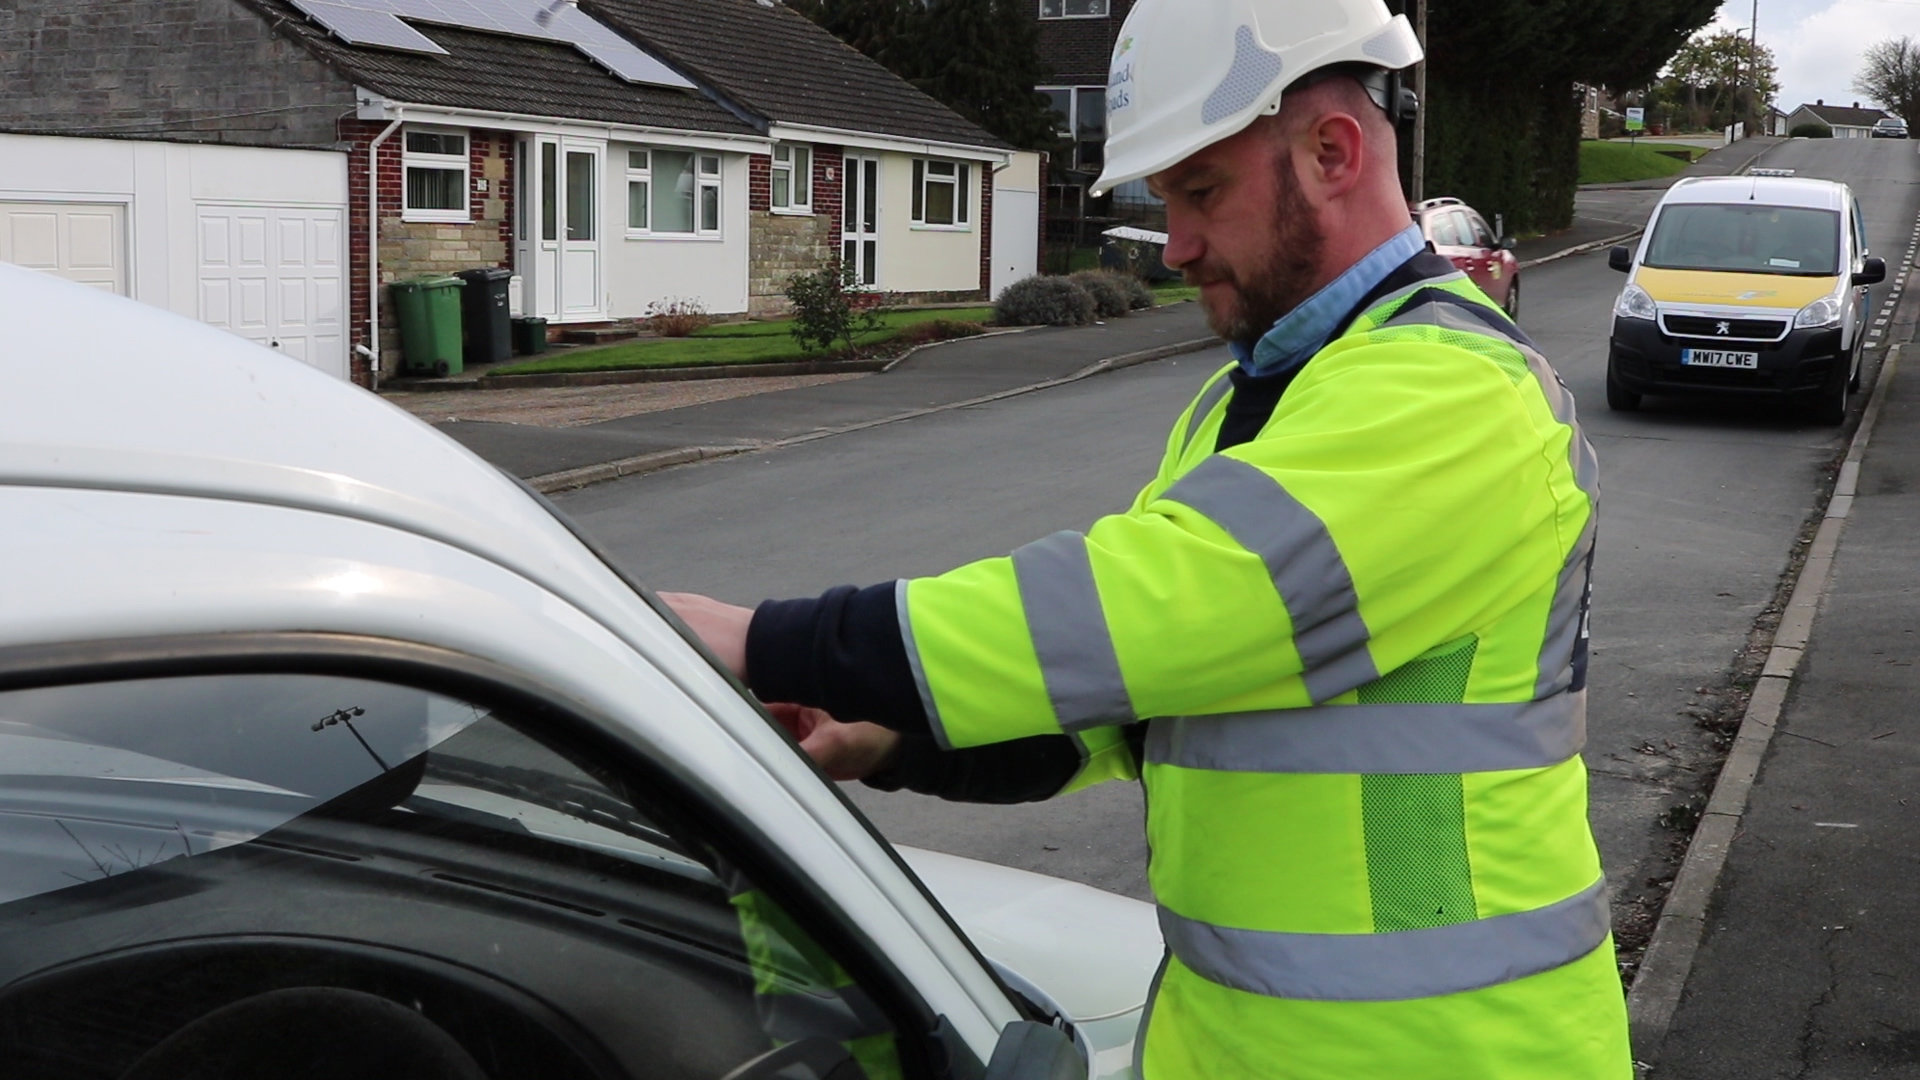 Photo showing Island Roads District Steward affixing a notice to an abandoned vehicle left in the street